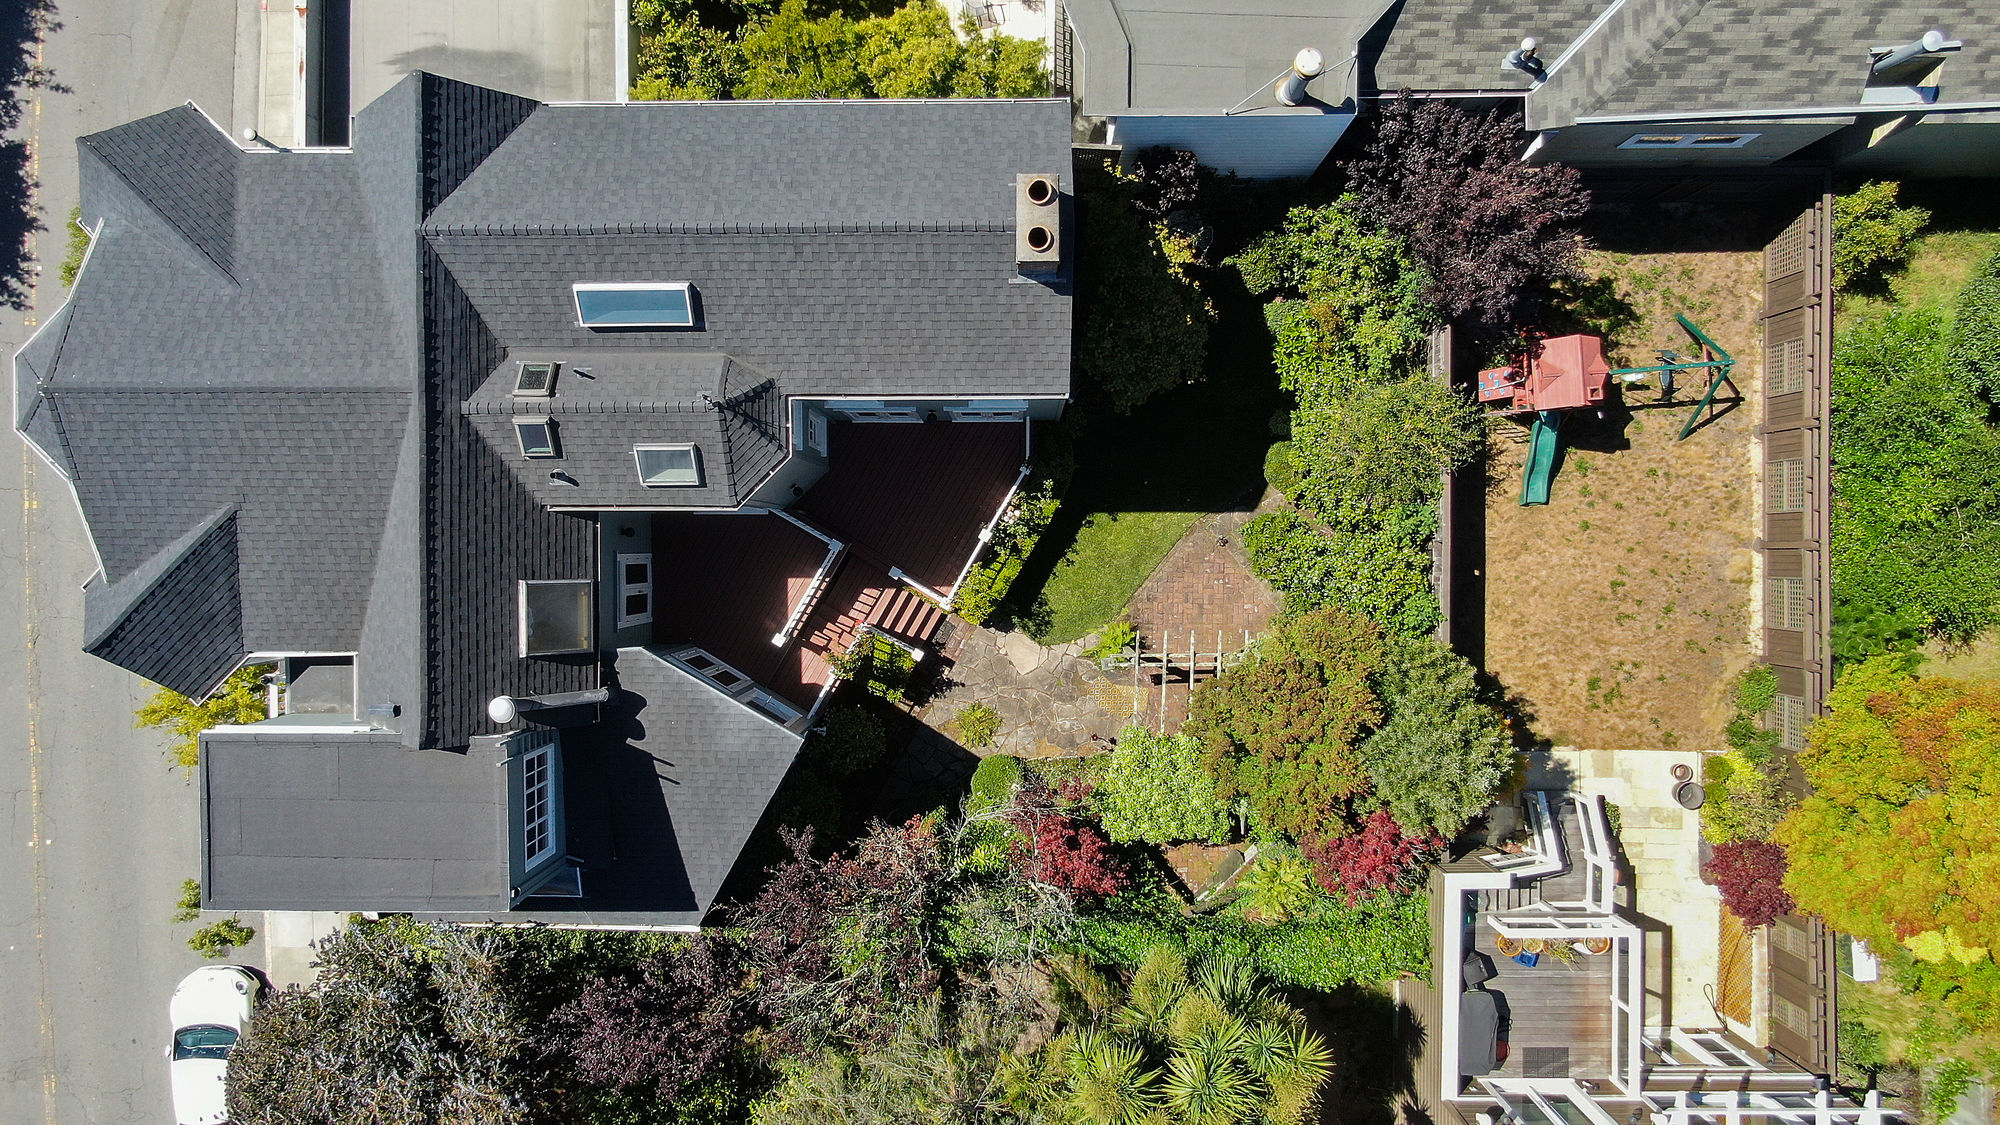 Property Photo: Aerial view of the yard, showing the expansive space and plant-life